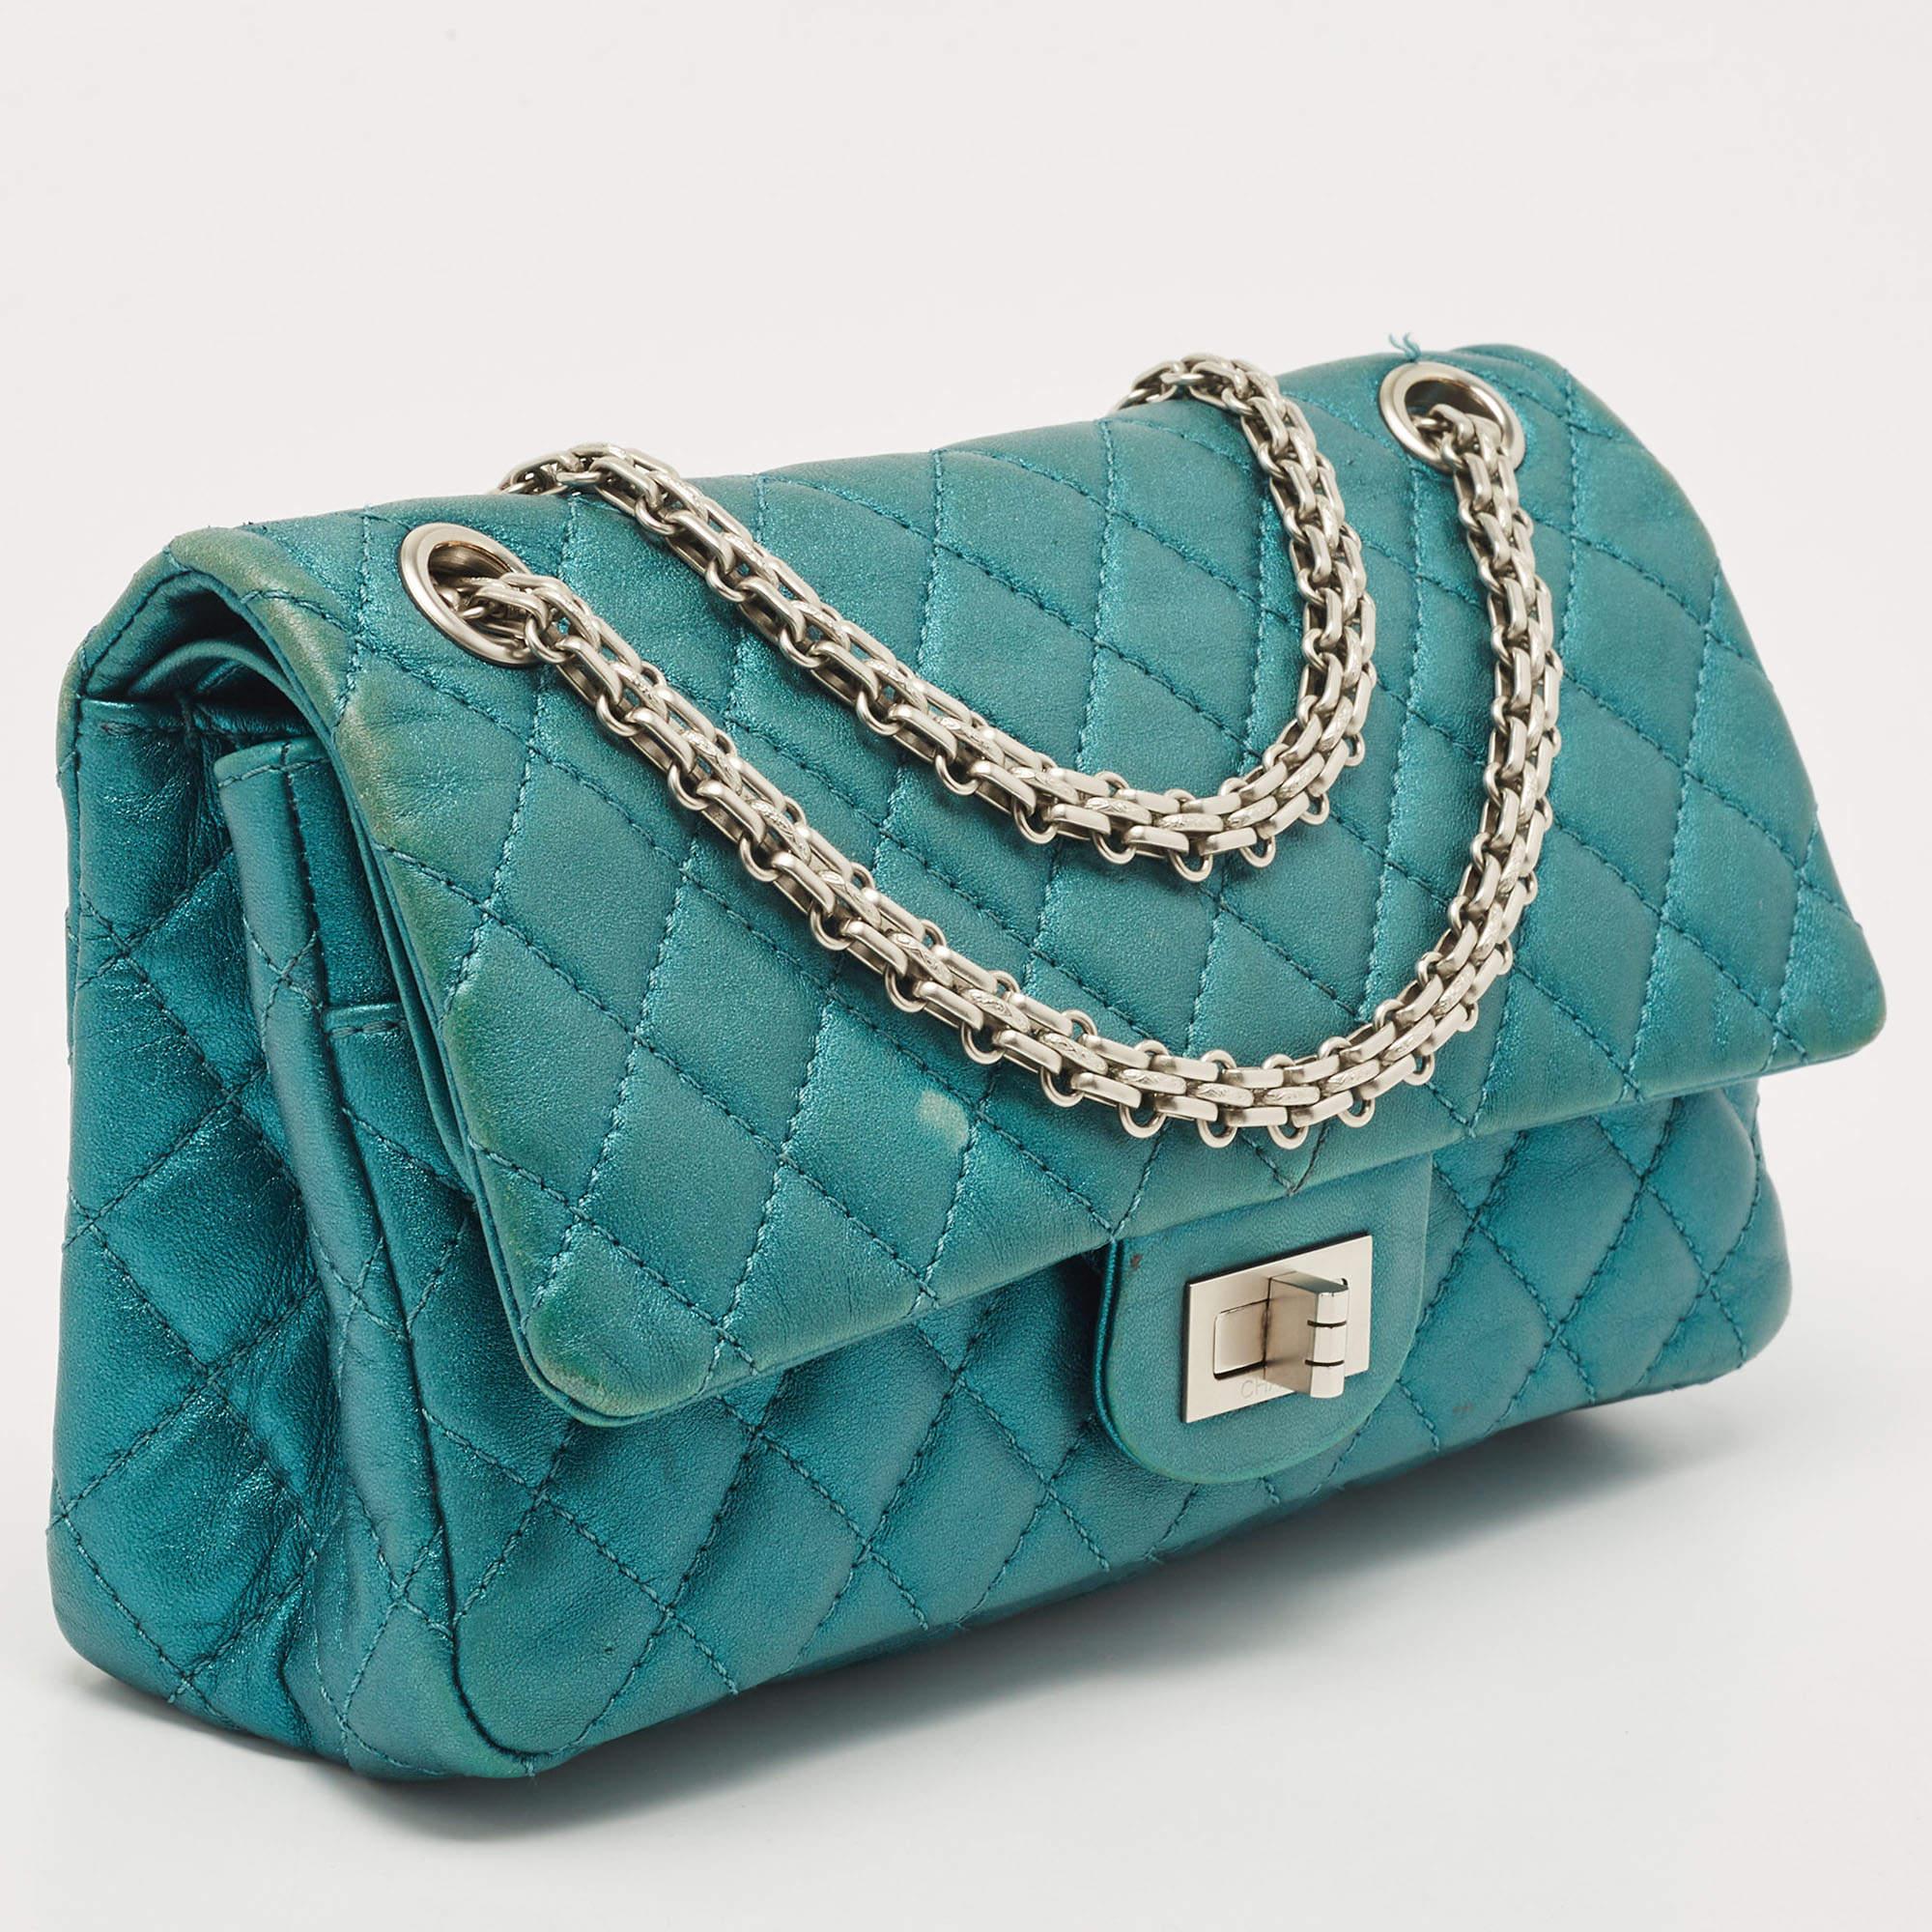 Beige Chanel Teal Quilted Leather Reissue 2.55 Classic 225 Flap Bag